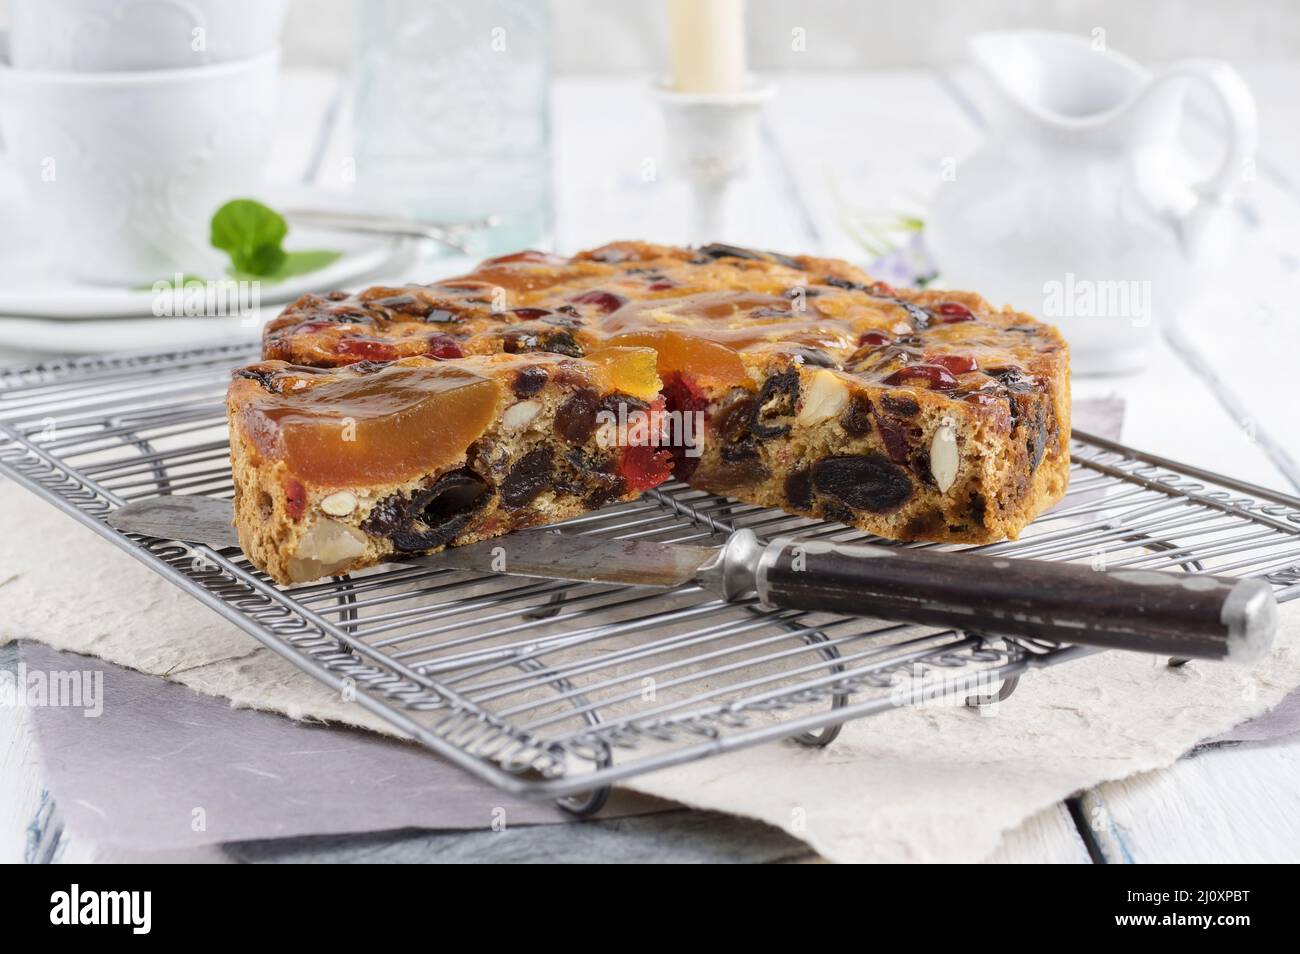 Traditional Australian Christmas cake with fruits and nuts served as close-up on a cake plate Stock Photo